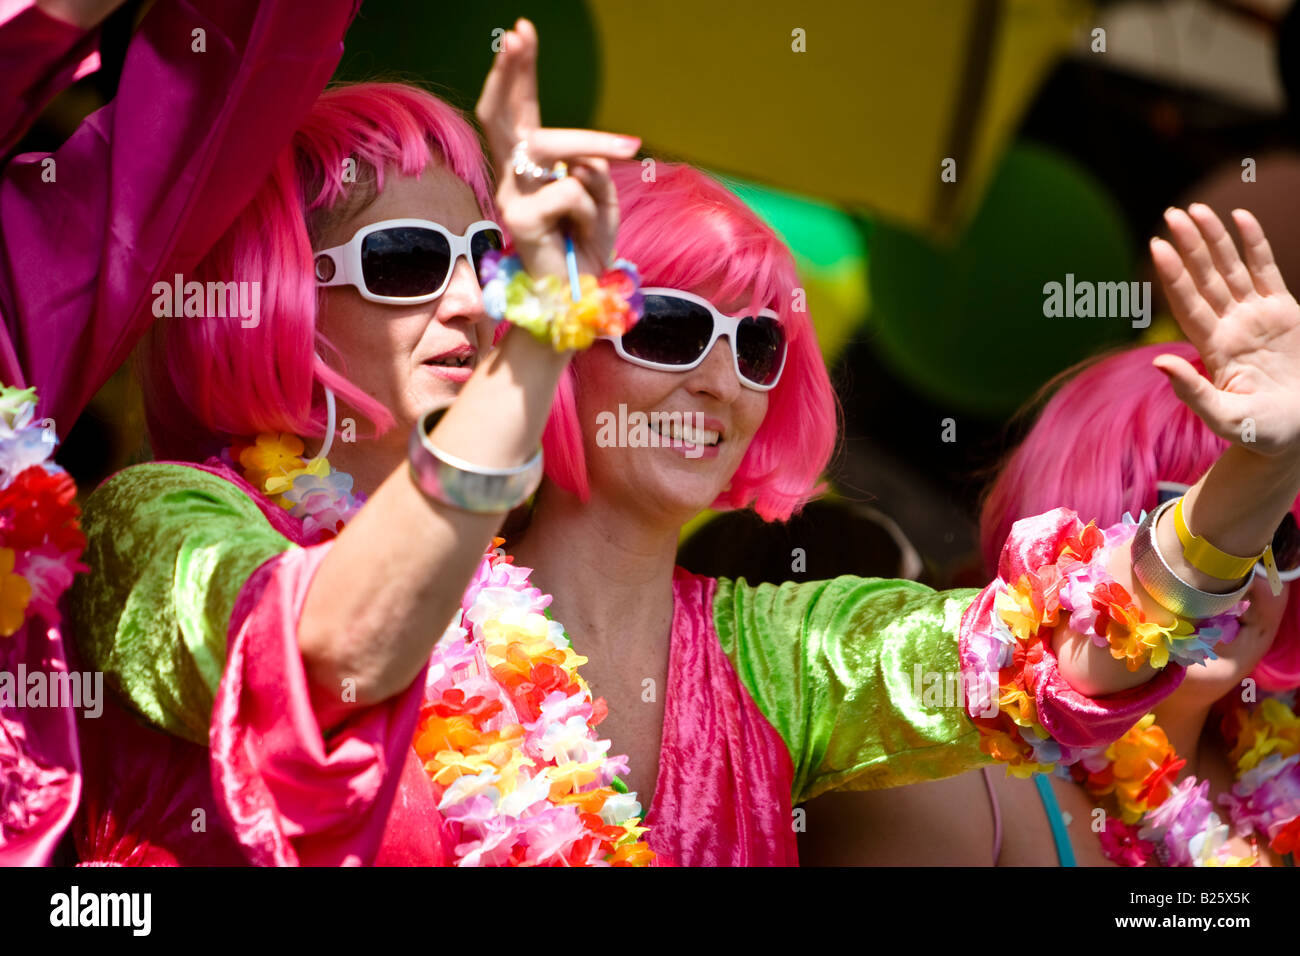 Two young women with pink wigs celebrate a german country music party the Schlagermove in Hamburg, Germany Stock Photo